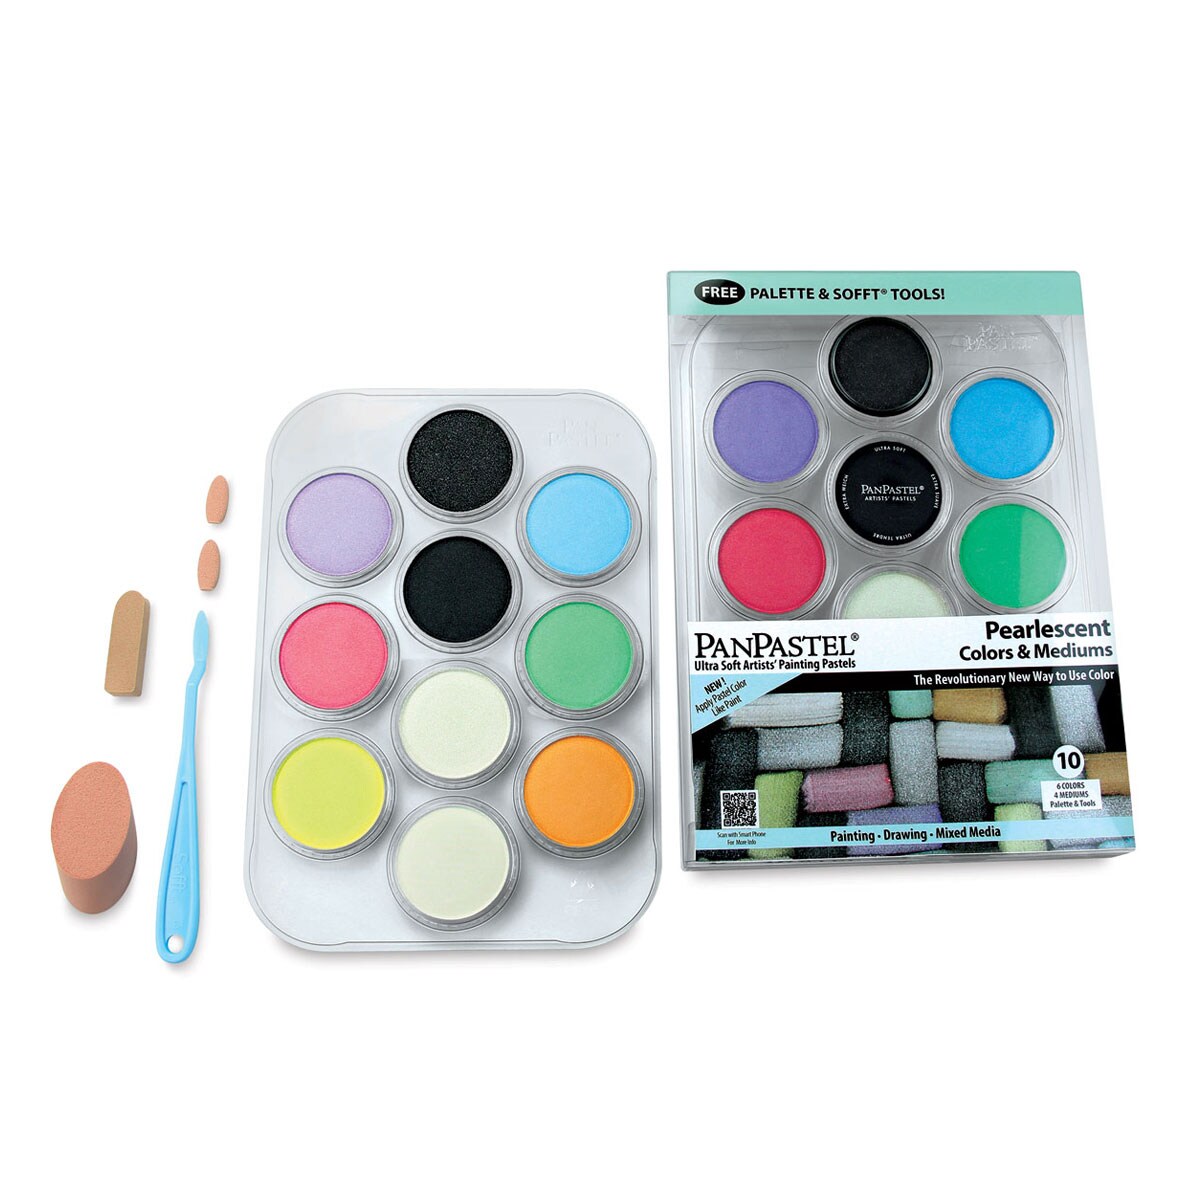 PanPastel Artists’ Painting Pastels Set - Pearlescent Colors and Mediums,  Set of 10